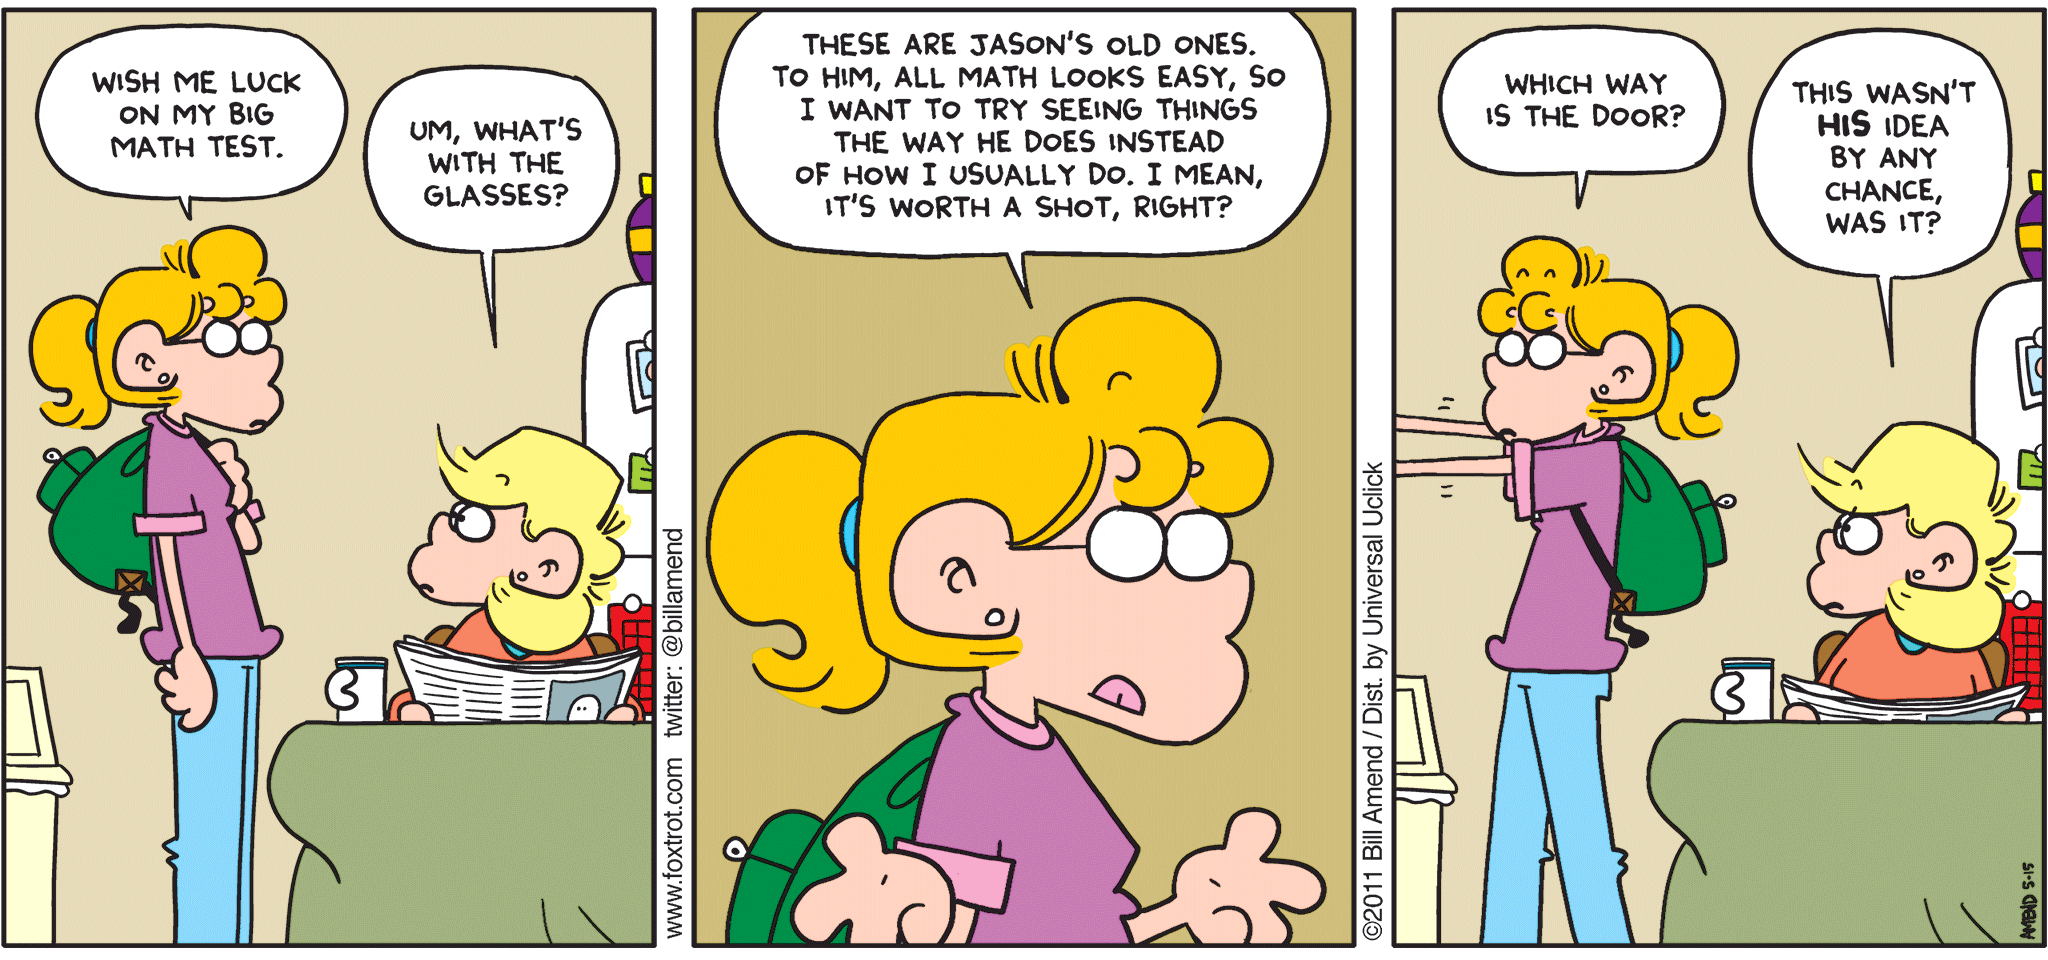 FoxTrot comic strip by Bill Amend - "Math Specs" published May 15, 2011 - Paige: Wish me luck on my big math test. Andy: Um, what's with the glasses? Paige: These are Jason's old ones. To him, all math looks easy, so I want to try seeing things the way he does instead of how I usually do, I mean, it's worth a shot, right? Which way is the door? Andy: This wasn't HIS idea by any chance, was it?